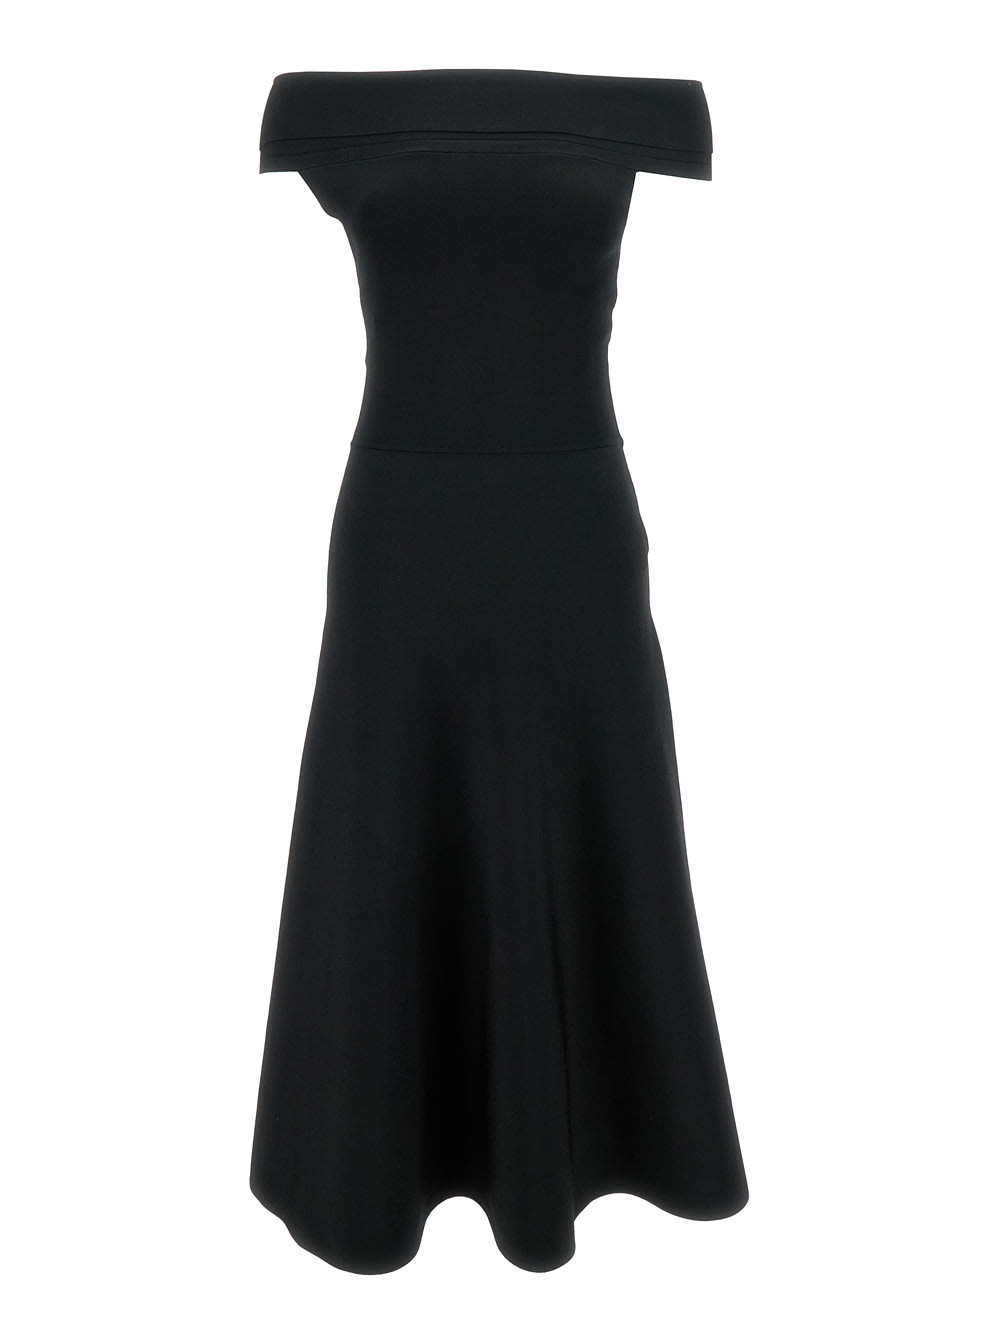 Maxi Black Dress With Flared Skirt In Viscose Blend Woman